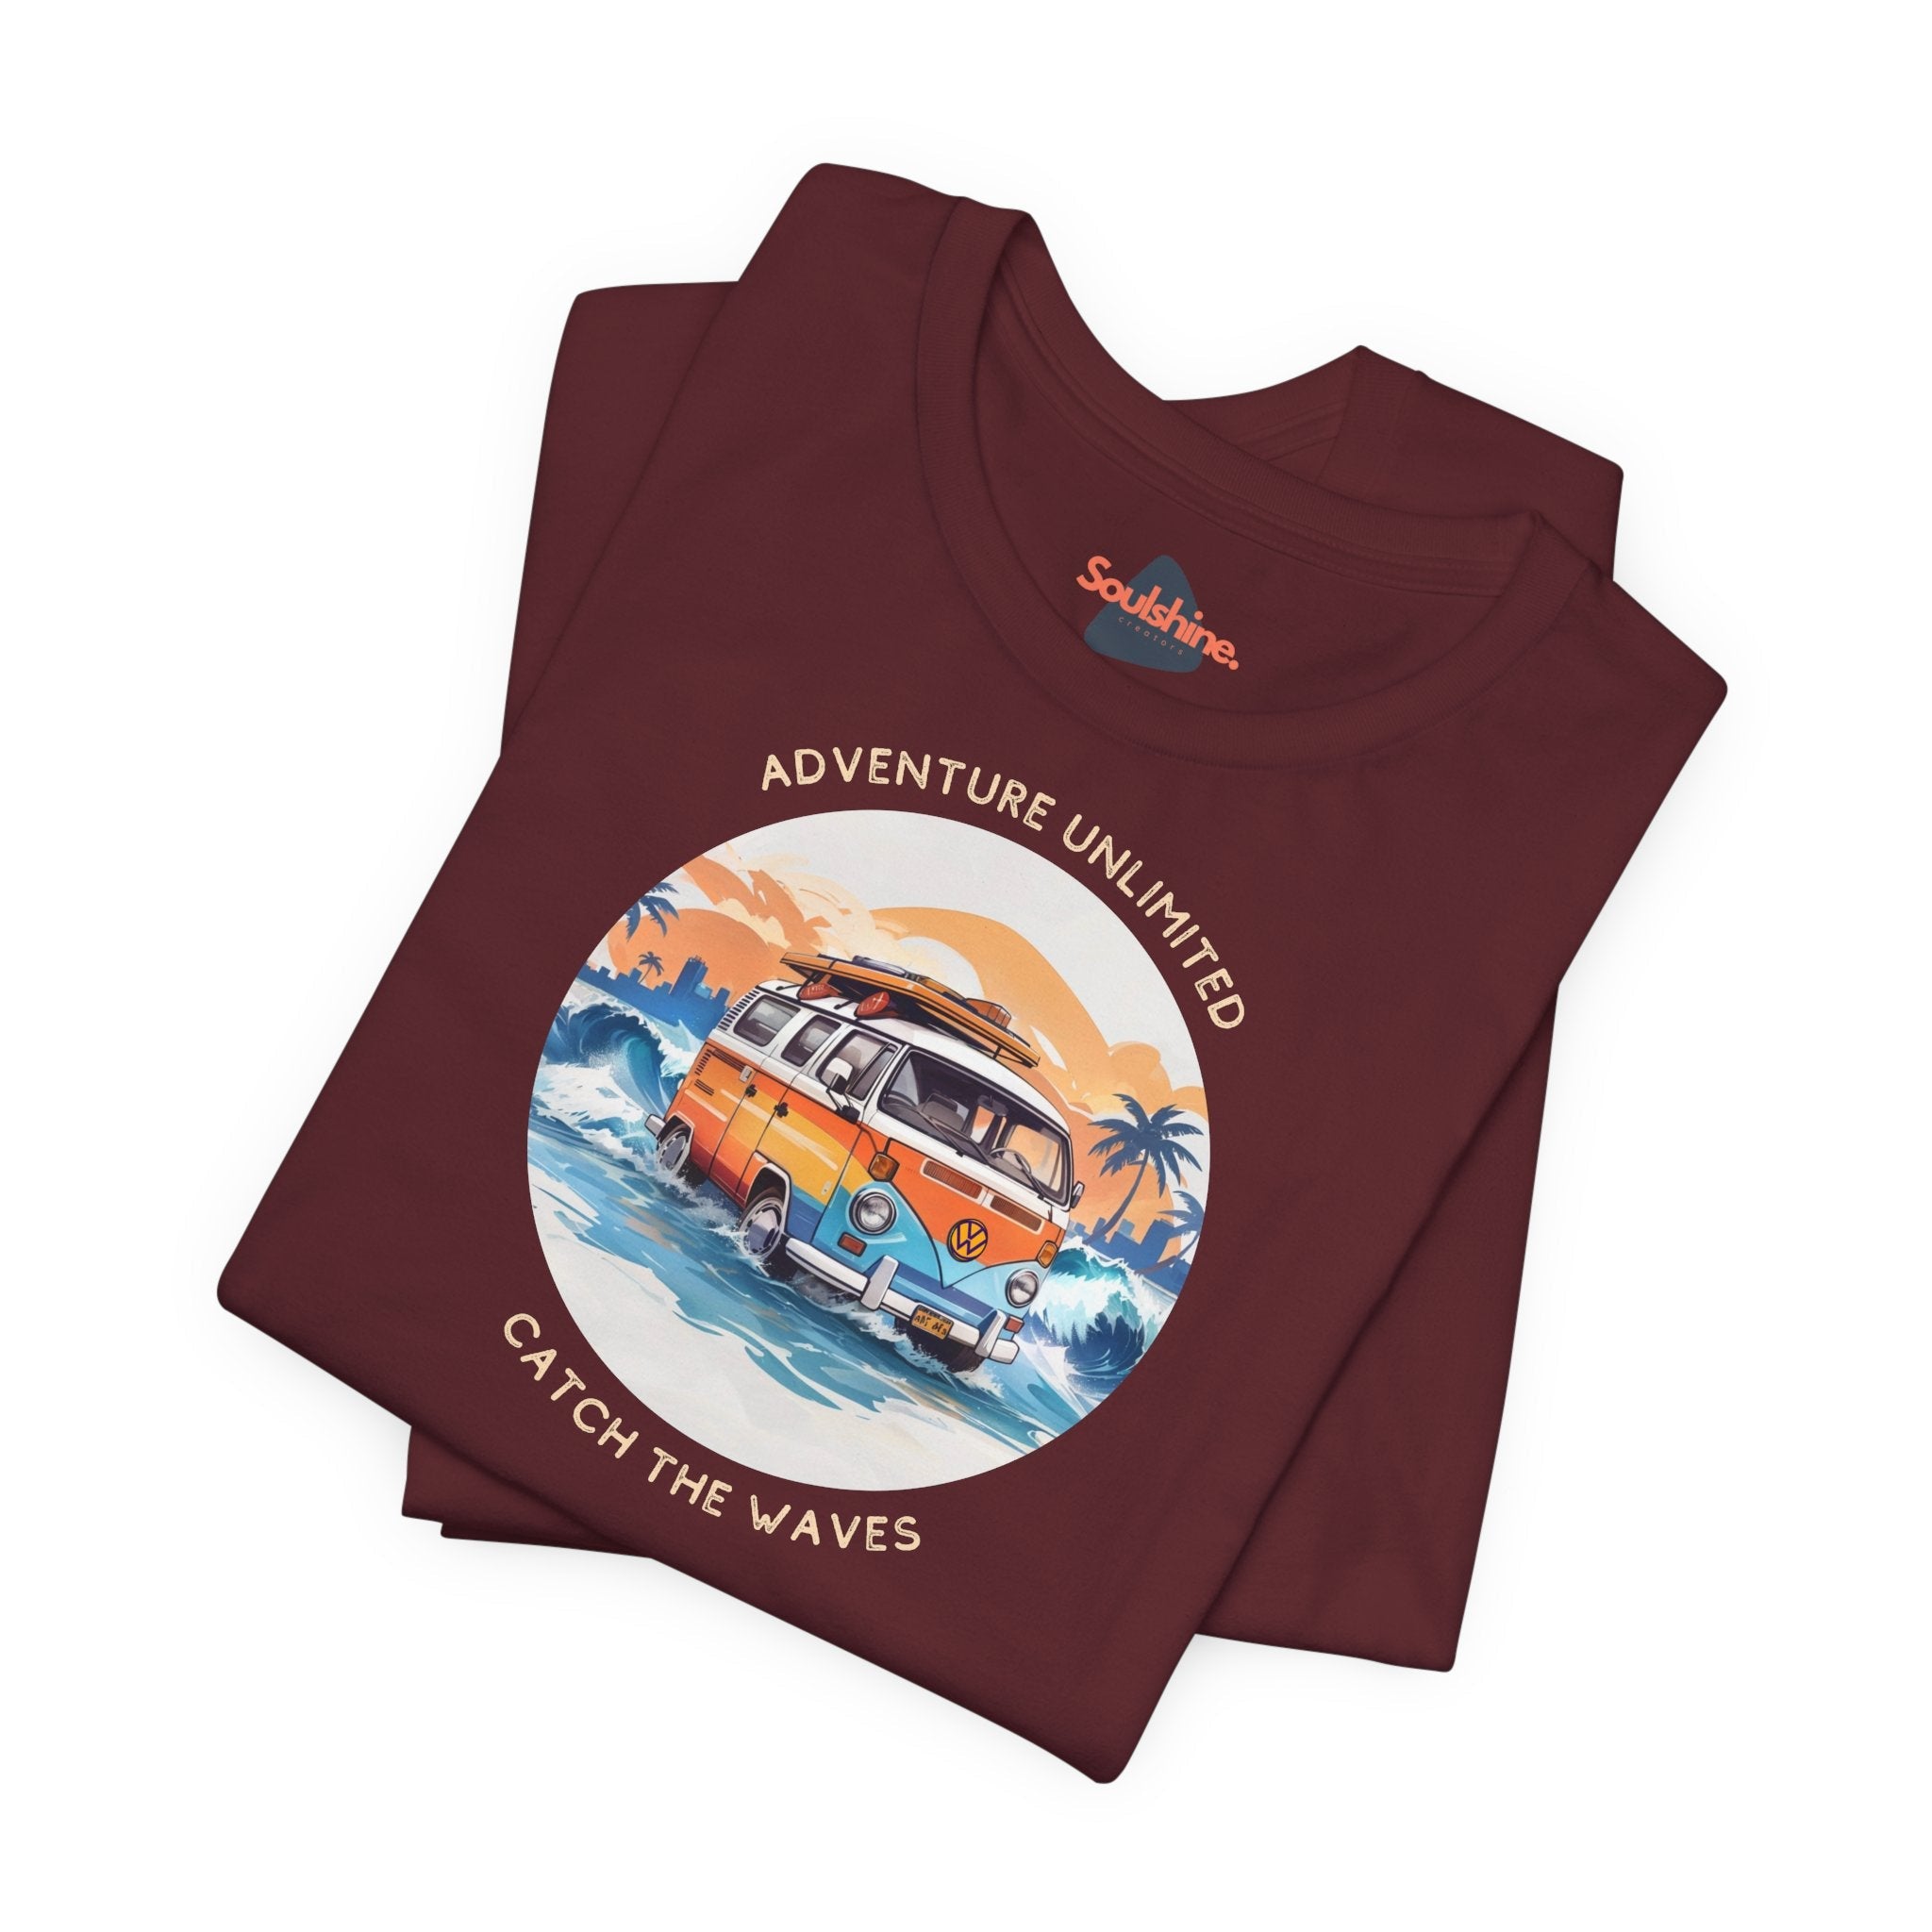 Direct-to-Garment printed maroon t-shirt with van driving through ocean